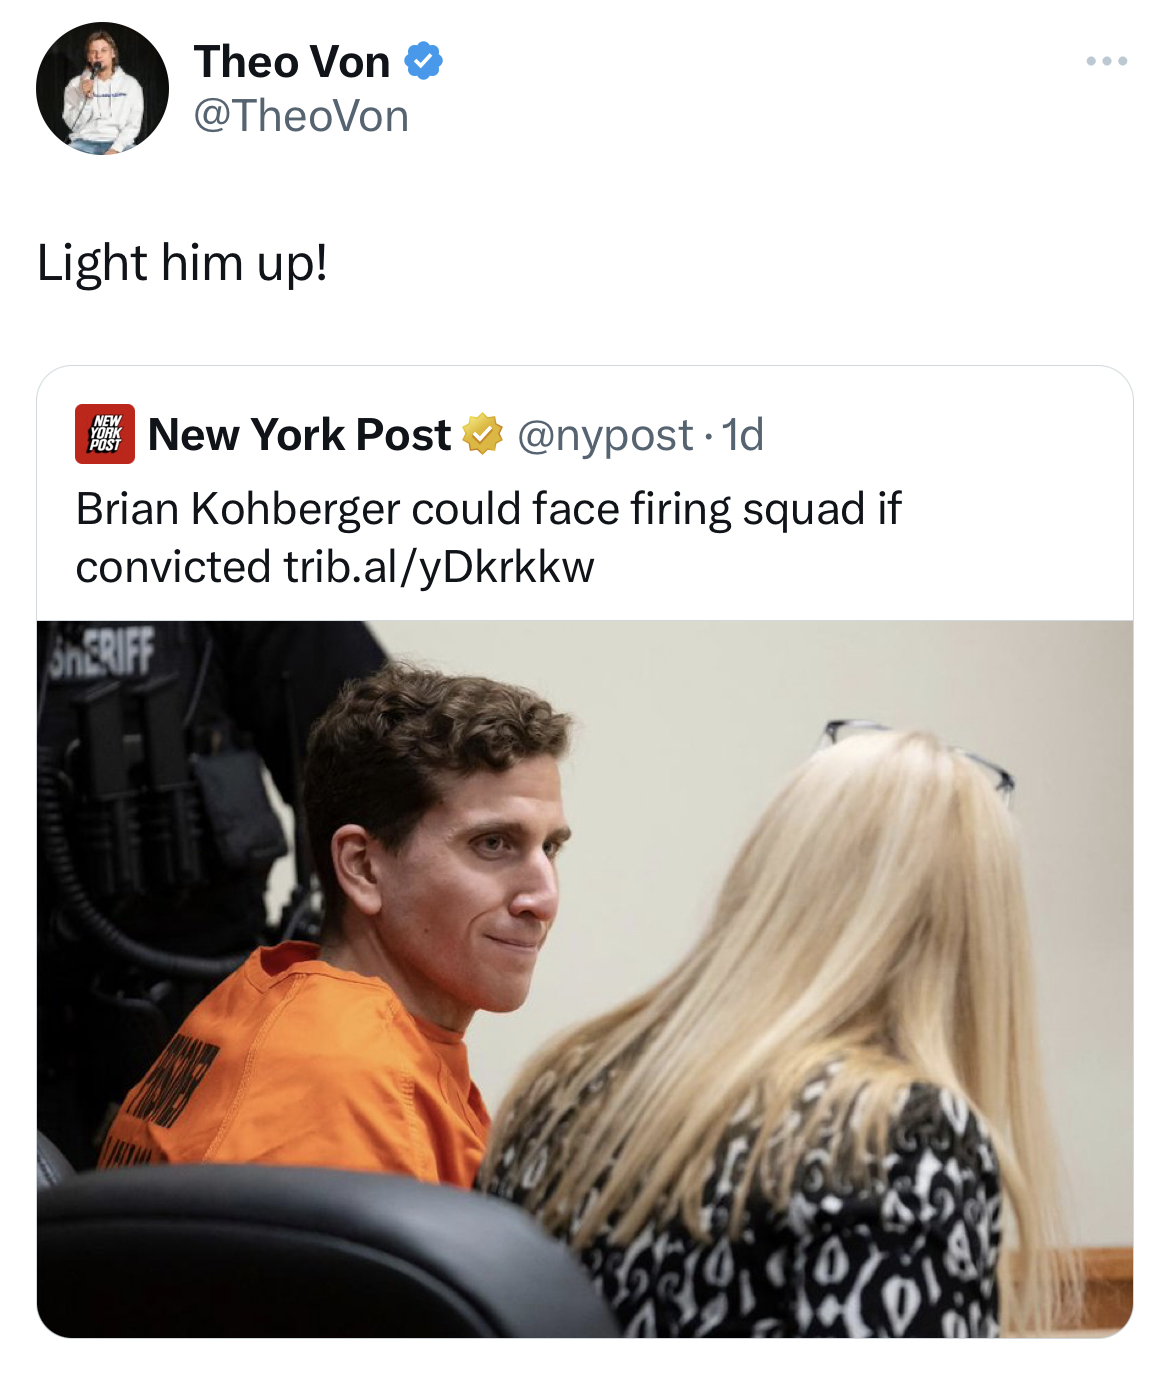 savage tweets - bryan kohberger - Theo Von Light him up! New York Post Brian Kohberger could face firing squad if convicted trib.alyDkrkkw Sheriff